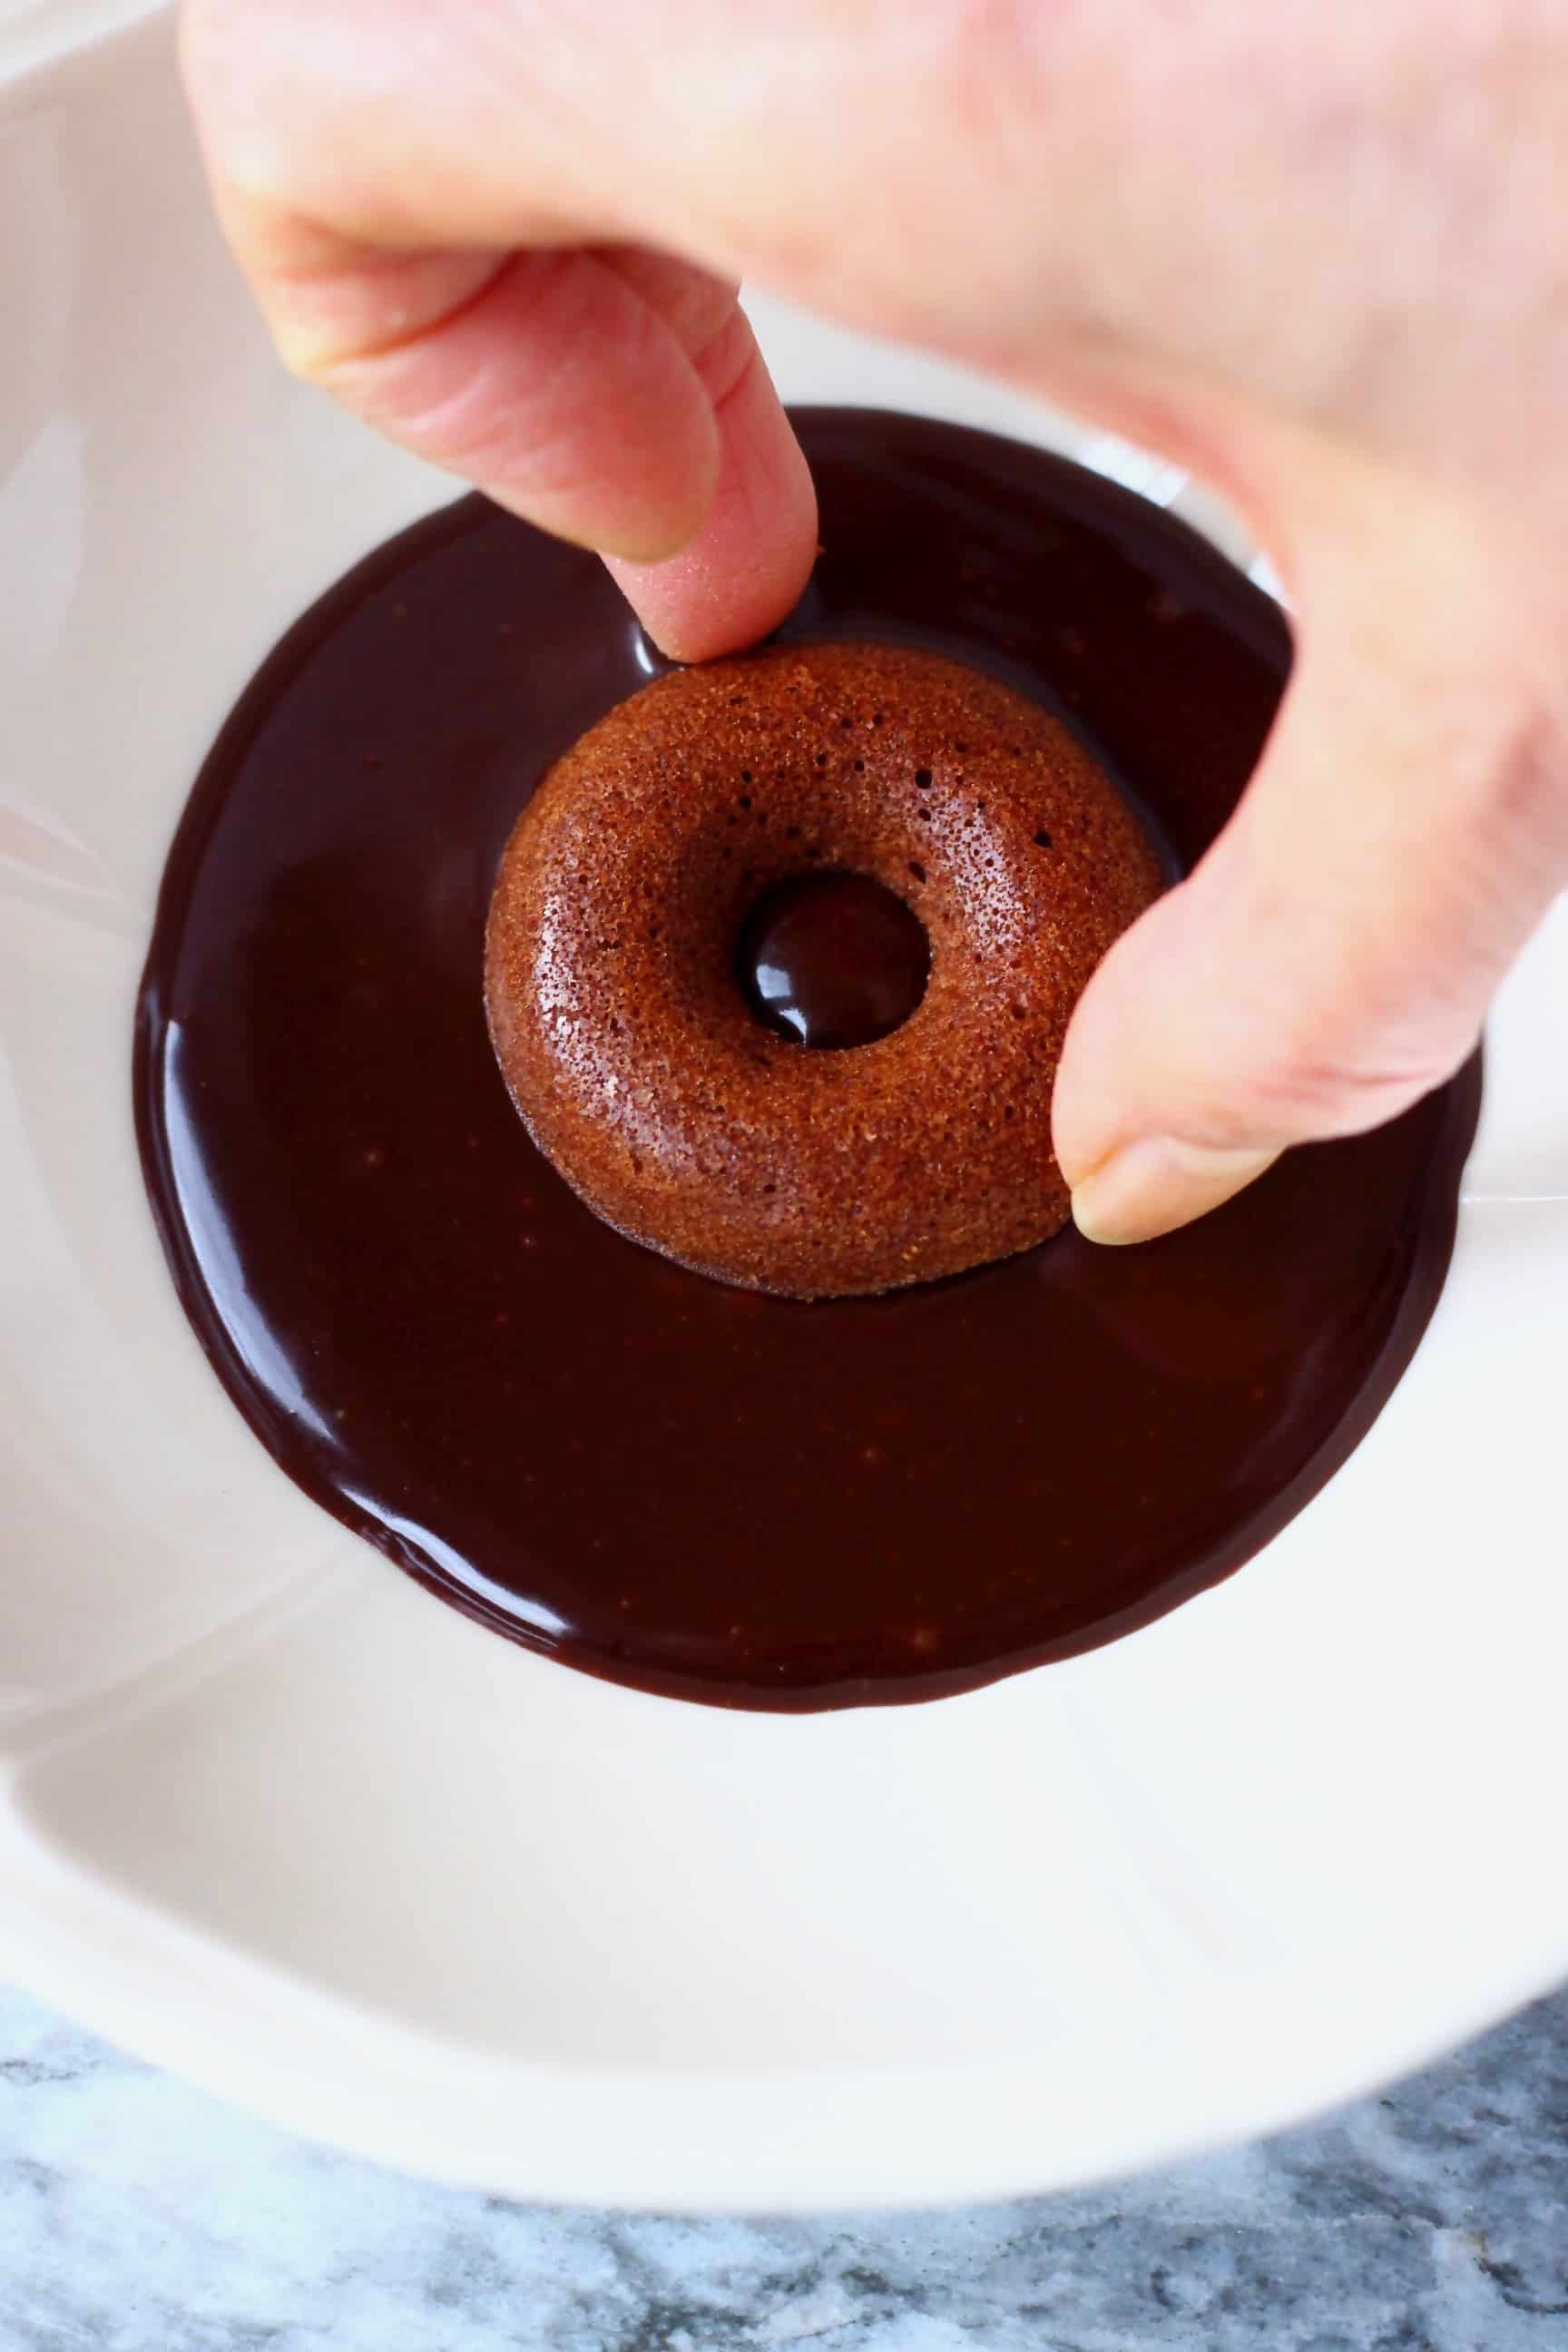 A mini chocolate donut being dipped into a white bowl of chocolate glaze